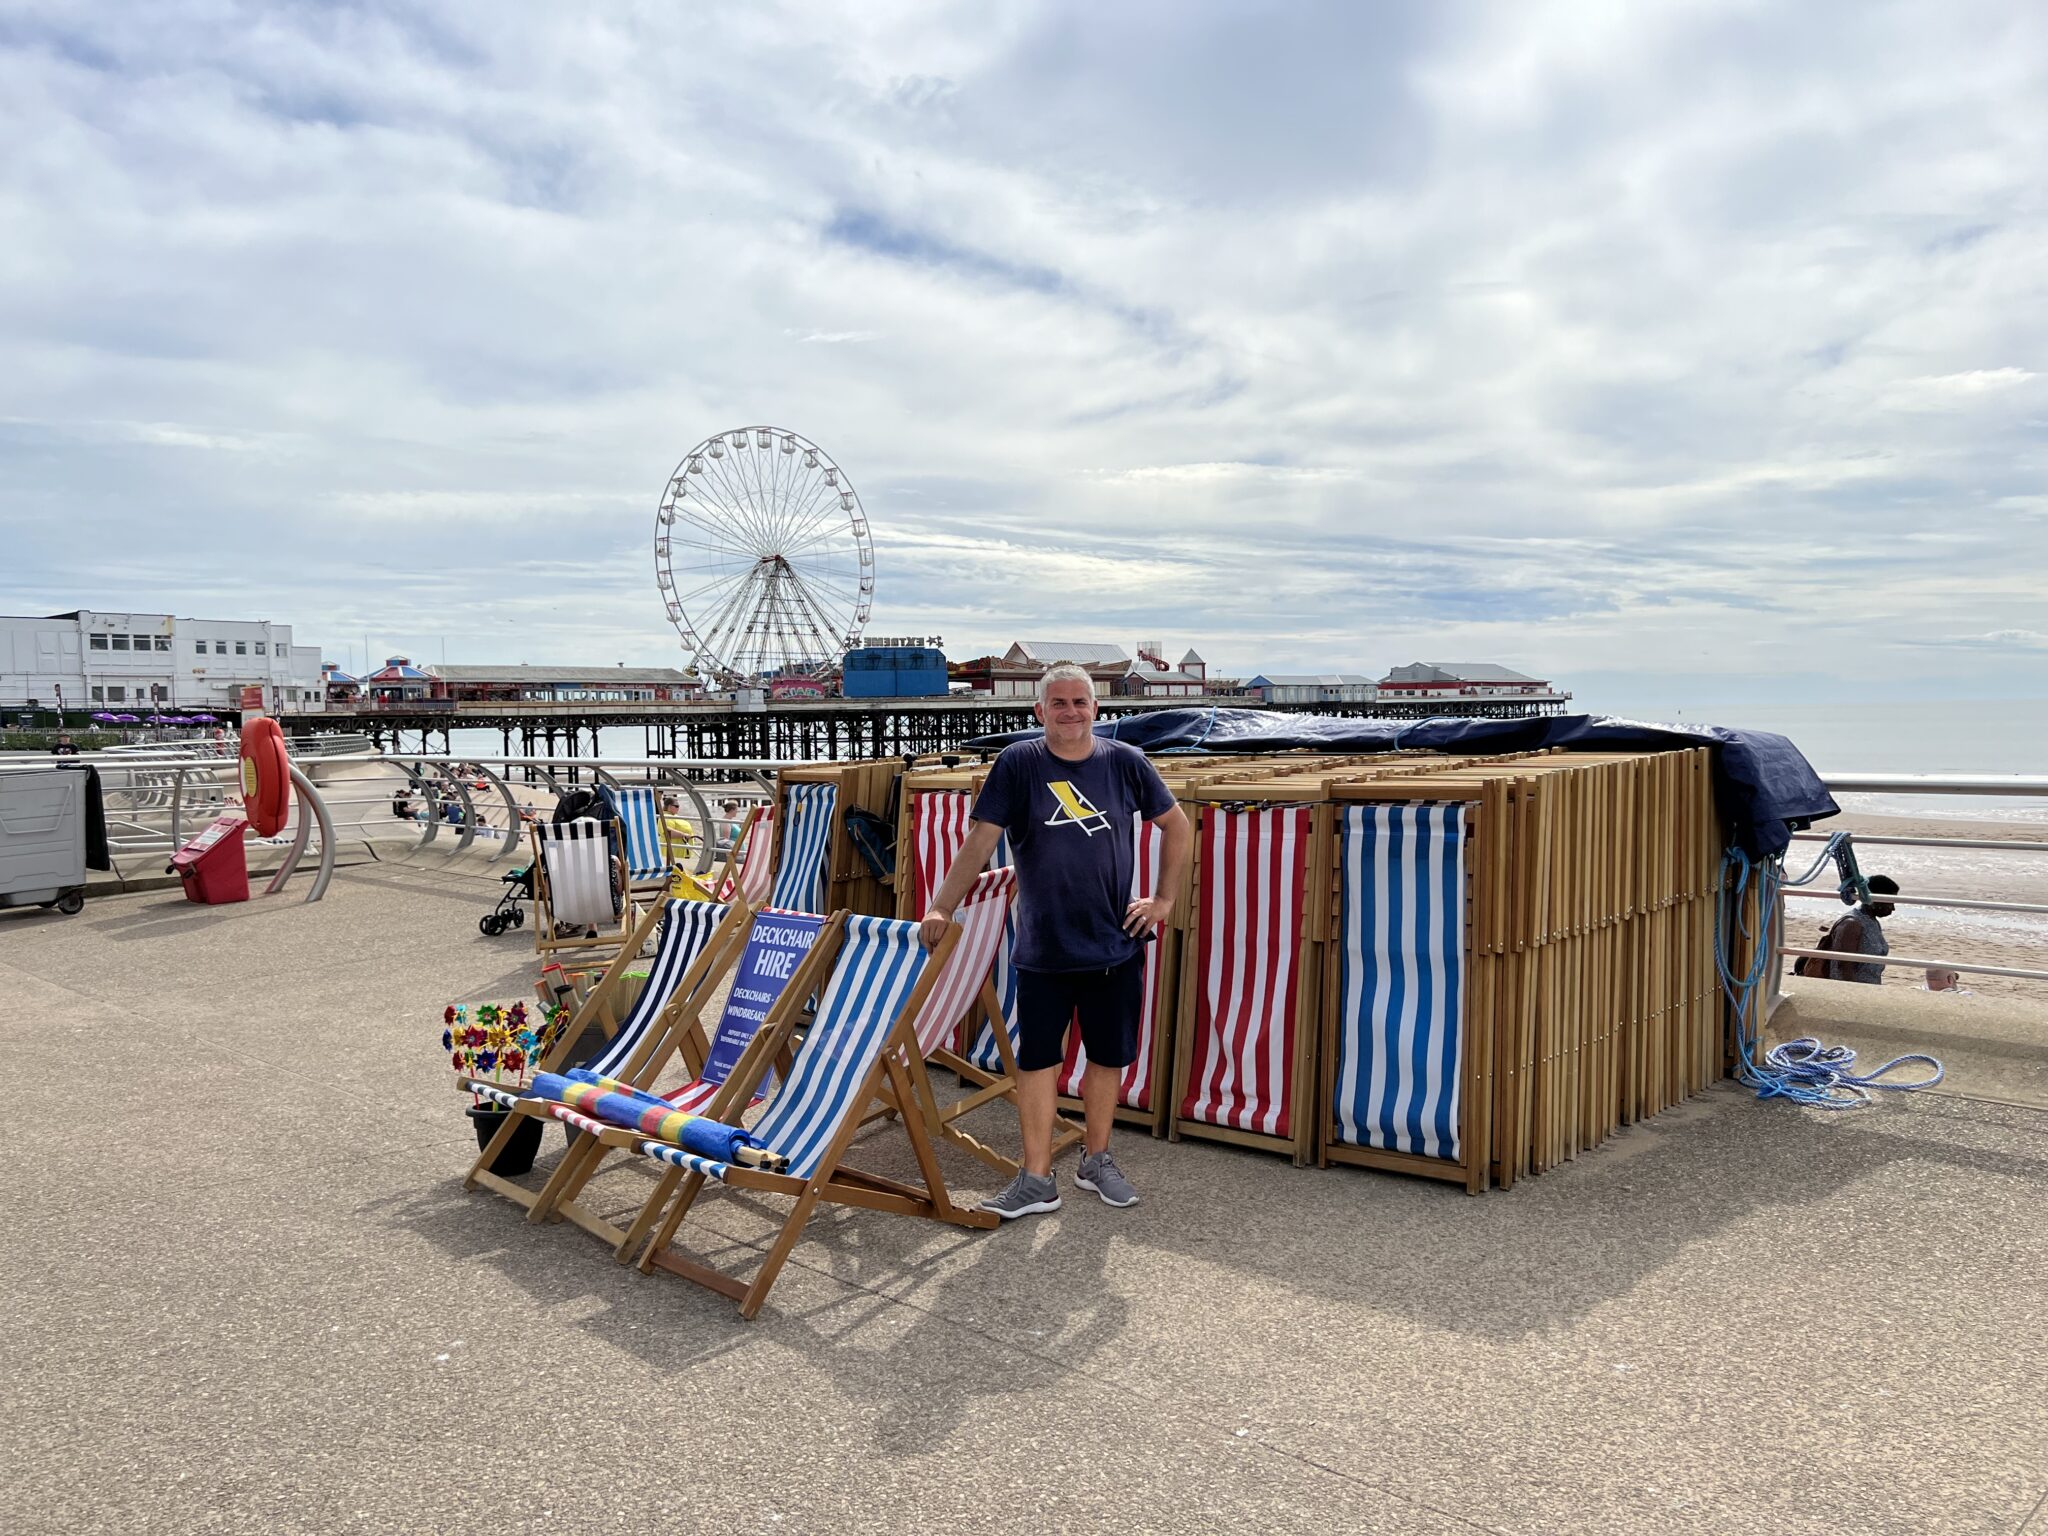 Deckchairs in Blackpool